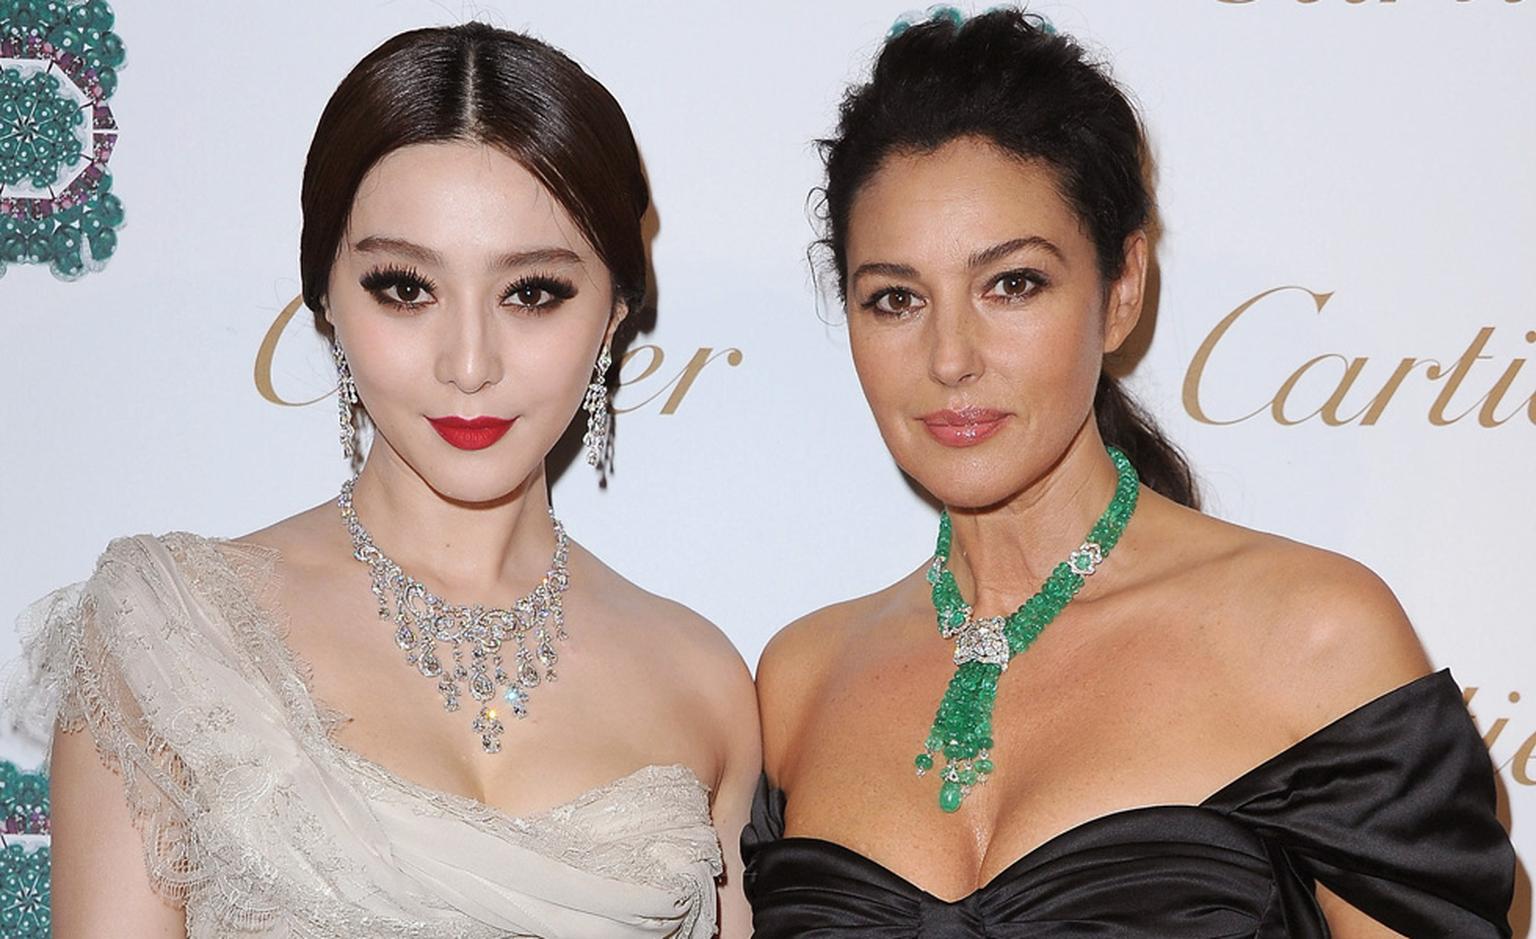 Fan BingBing and Monica Belluci at Cartier's opulent launch party of the new high jewellery collection Sortilège, l'enchantment des pierres.